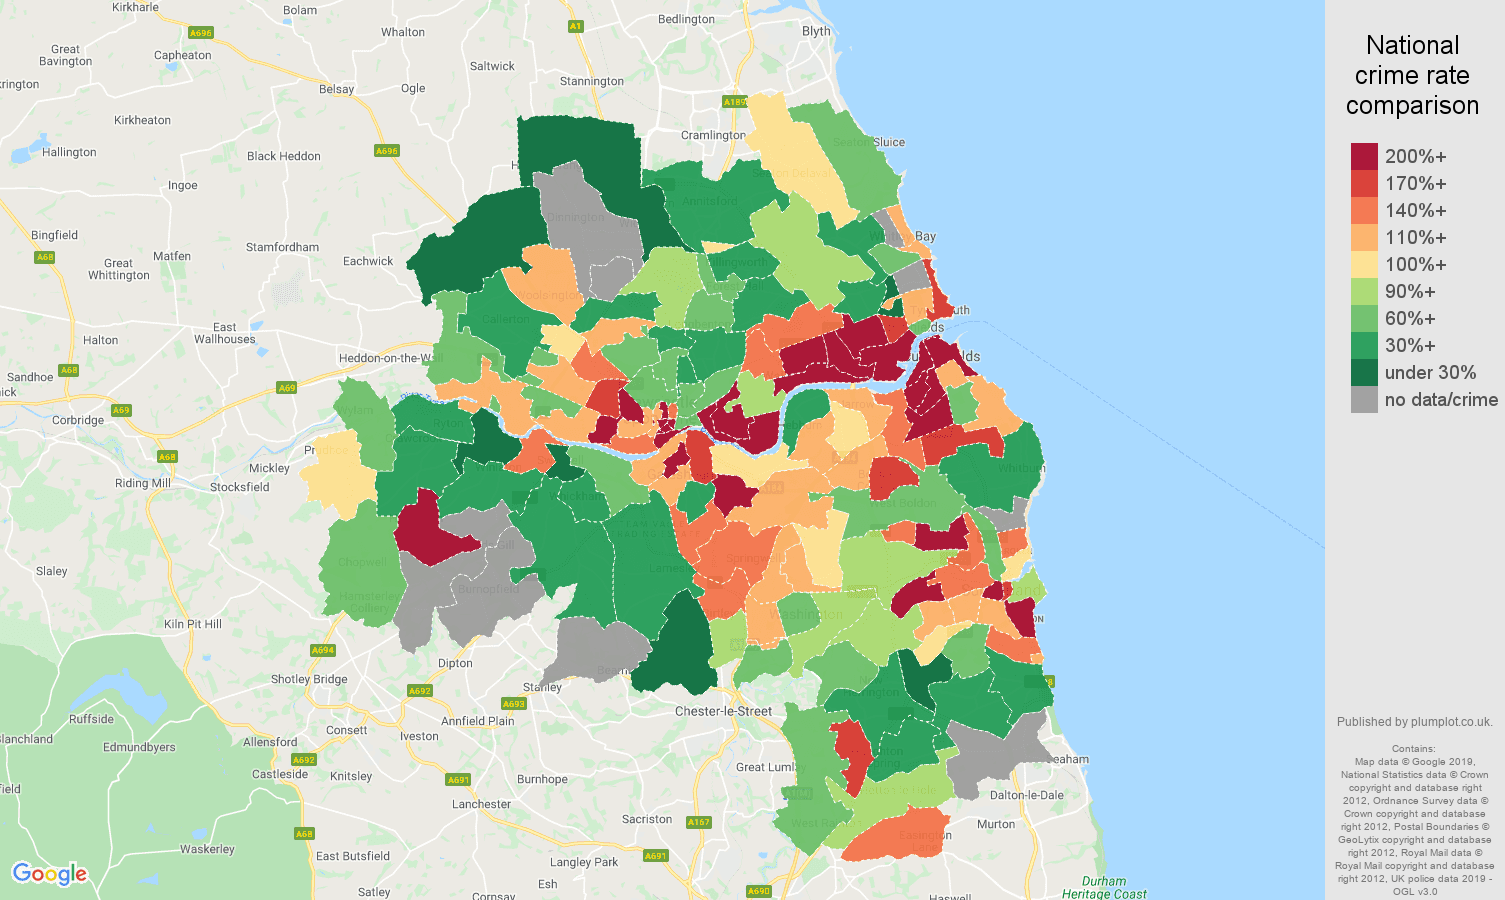 Tyne and Wear possession of weapons crime rate comparison map